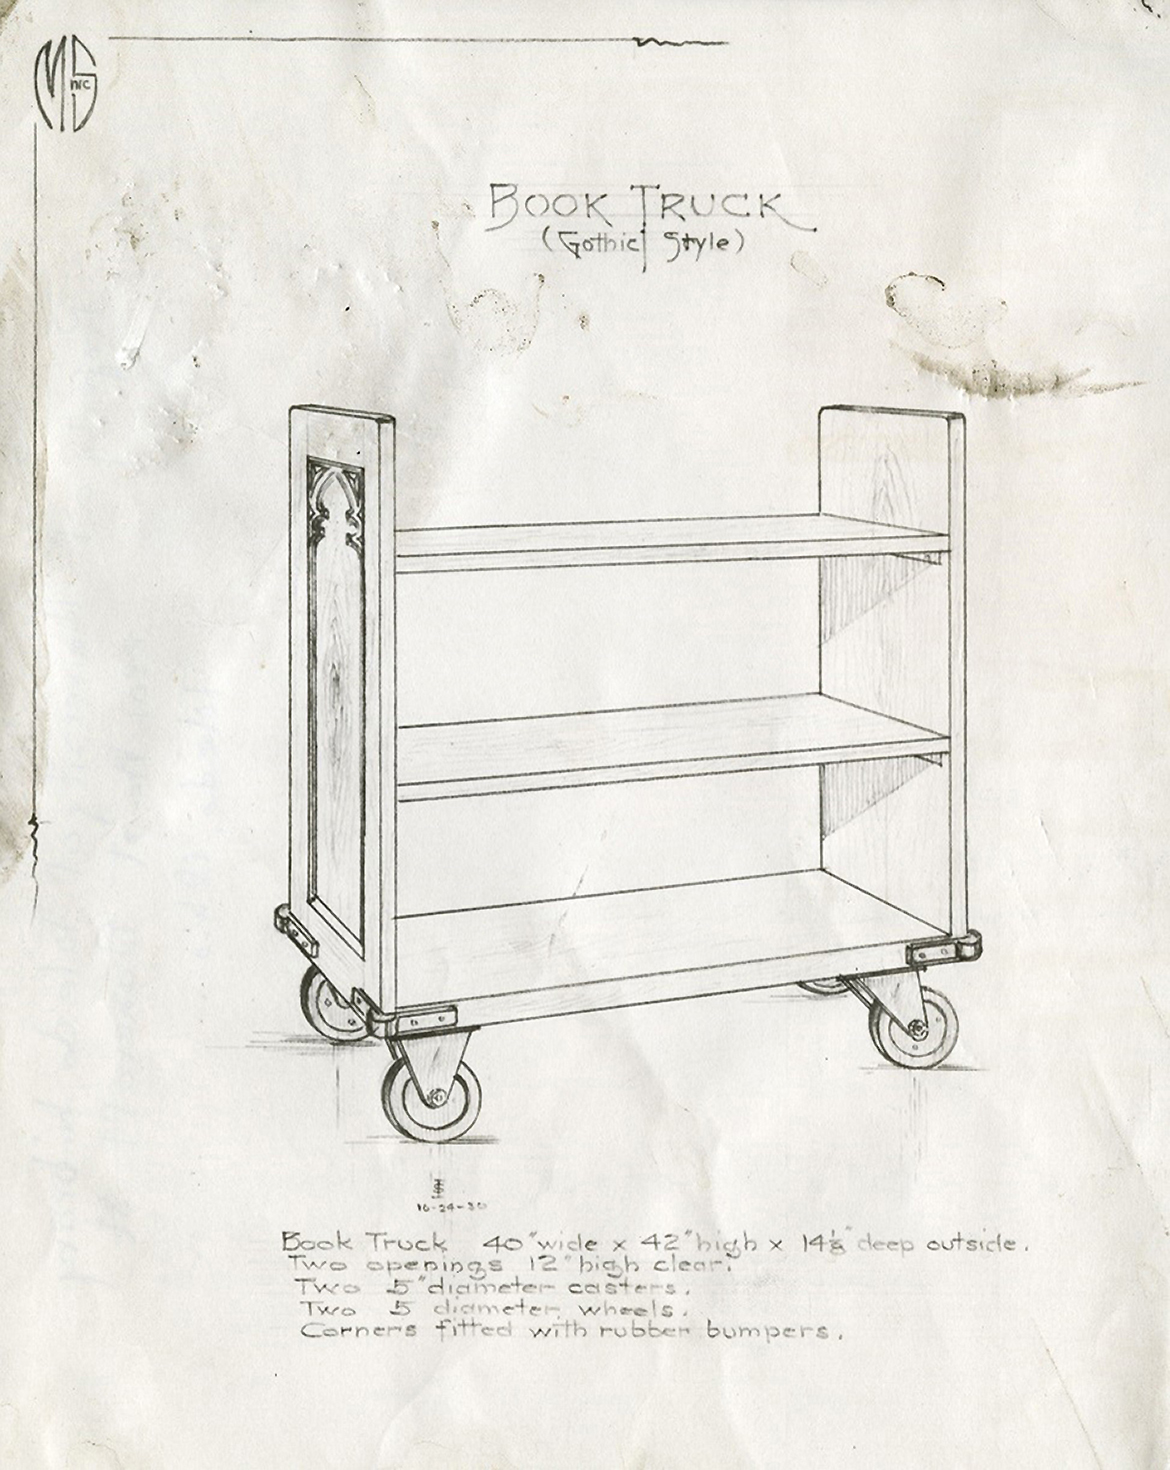 Book Truck (Gothic Style), drawing